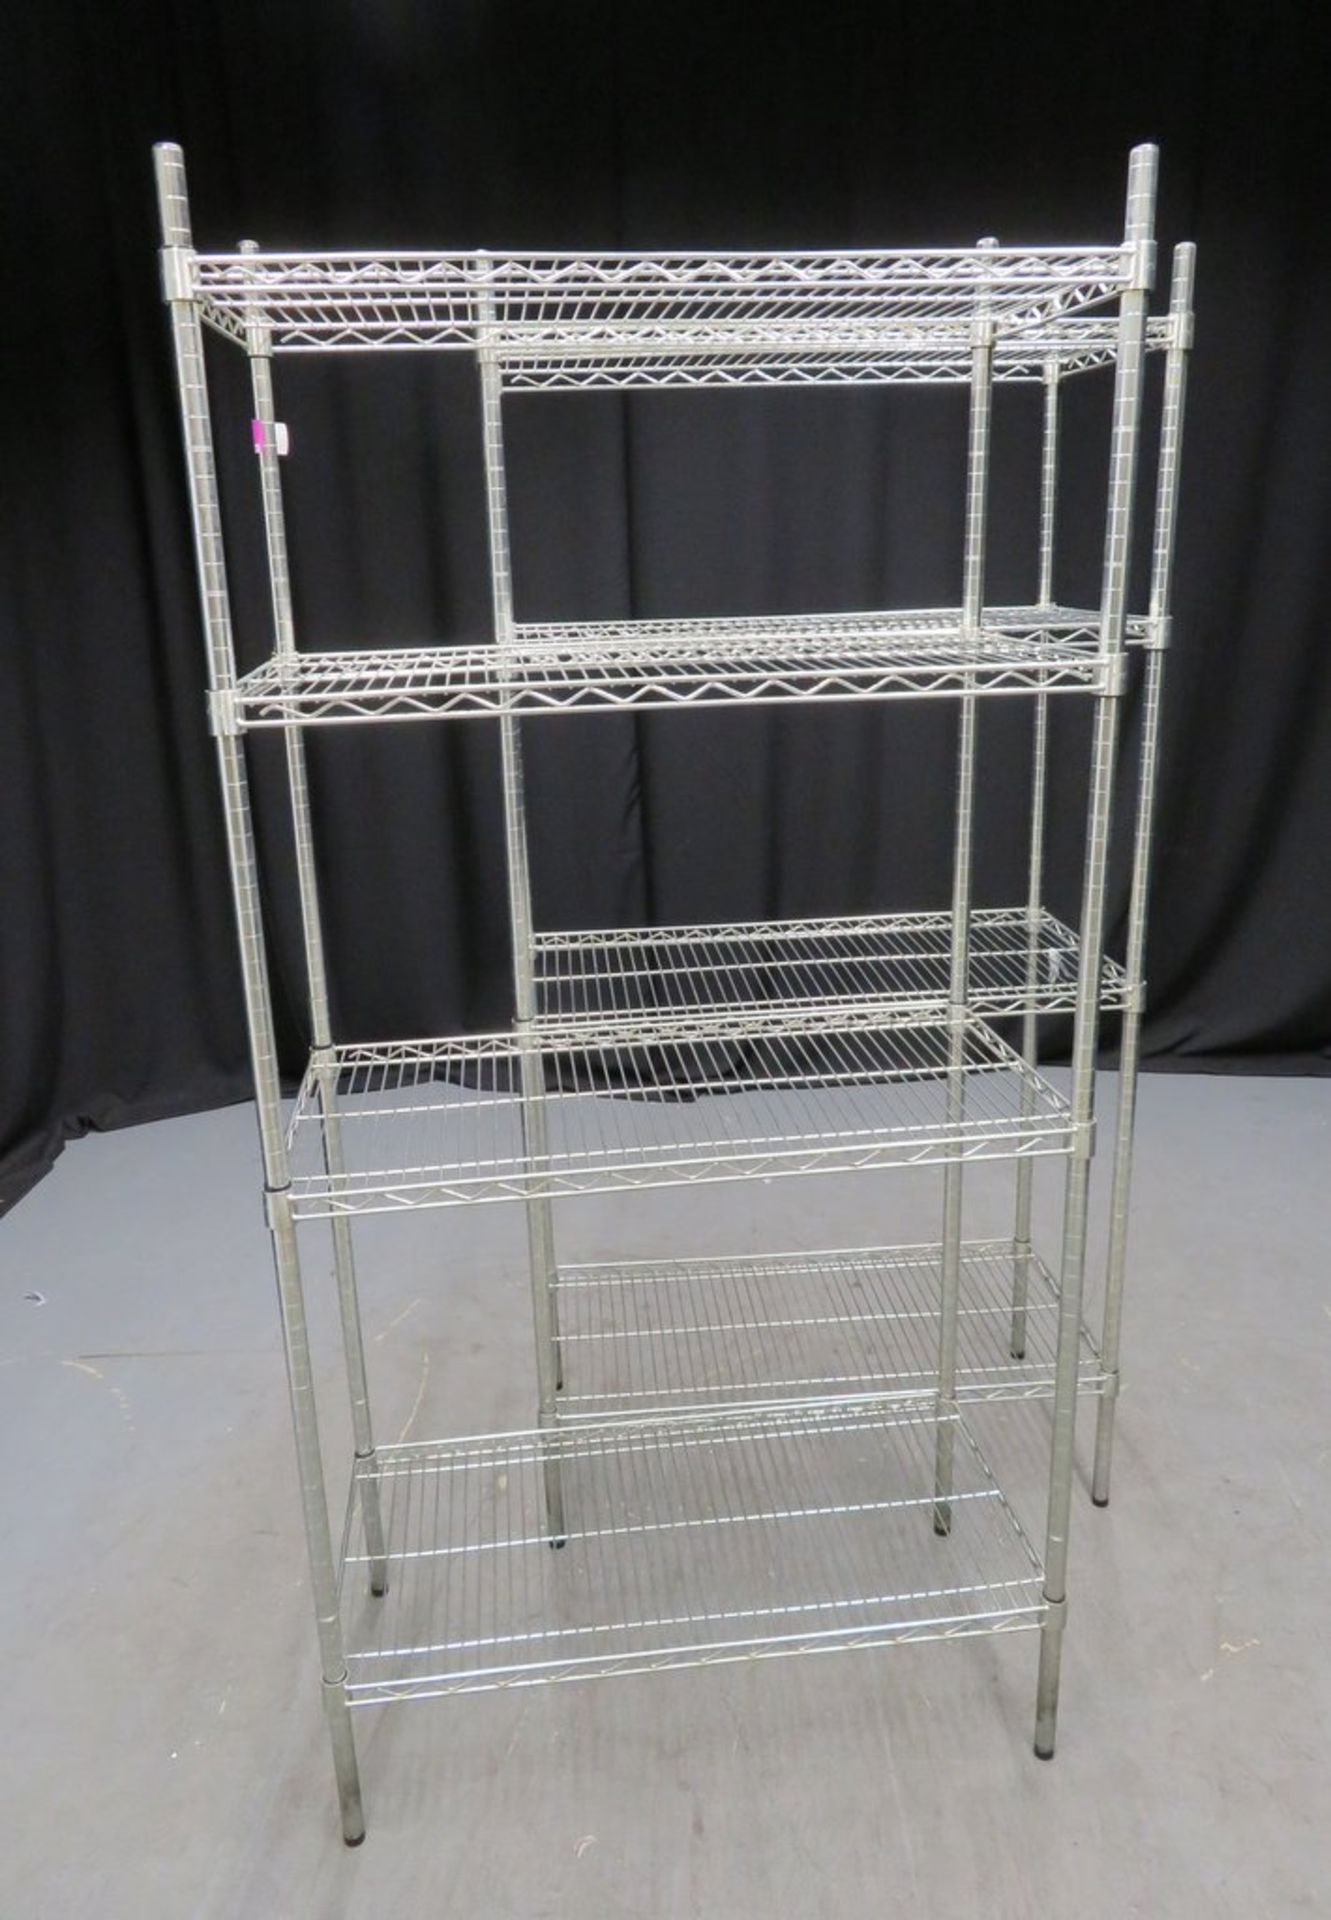 2 x Vogue stainless steel 4 tier shelving units 900mm W x 460mm D x 1860mm D - Image 2 of 3